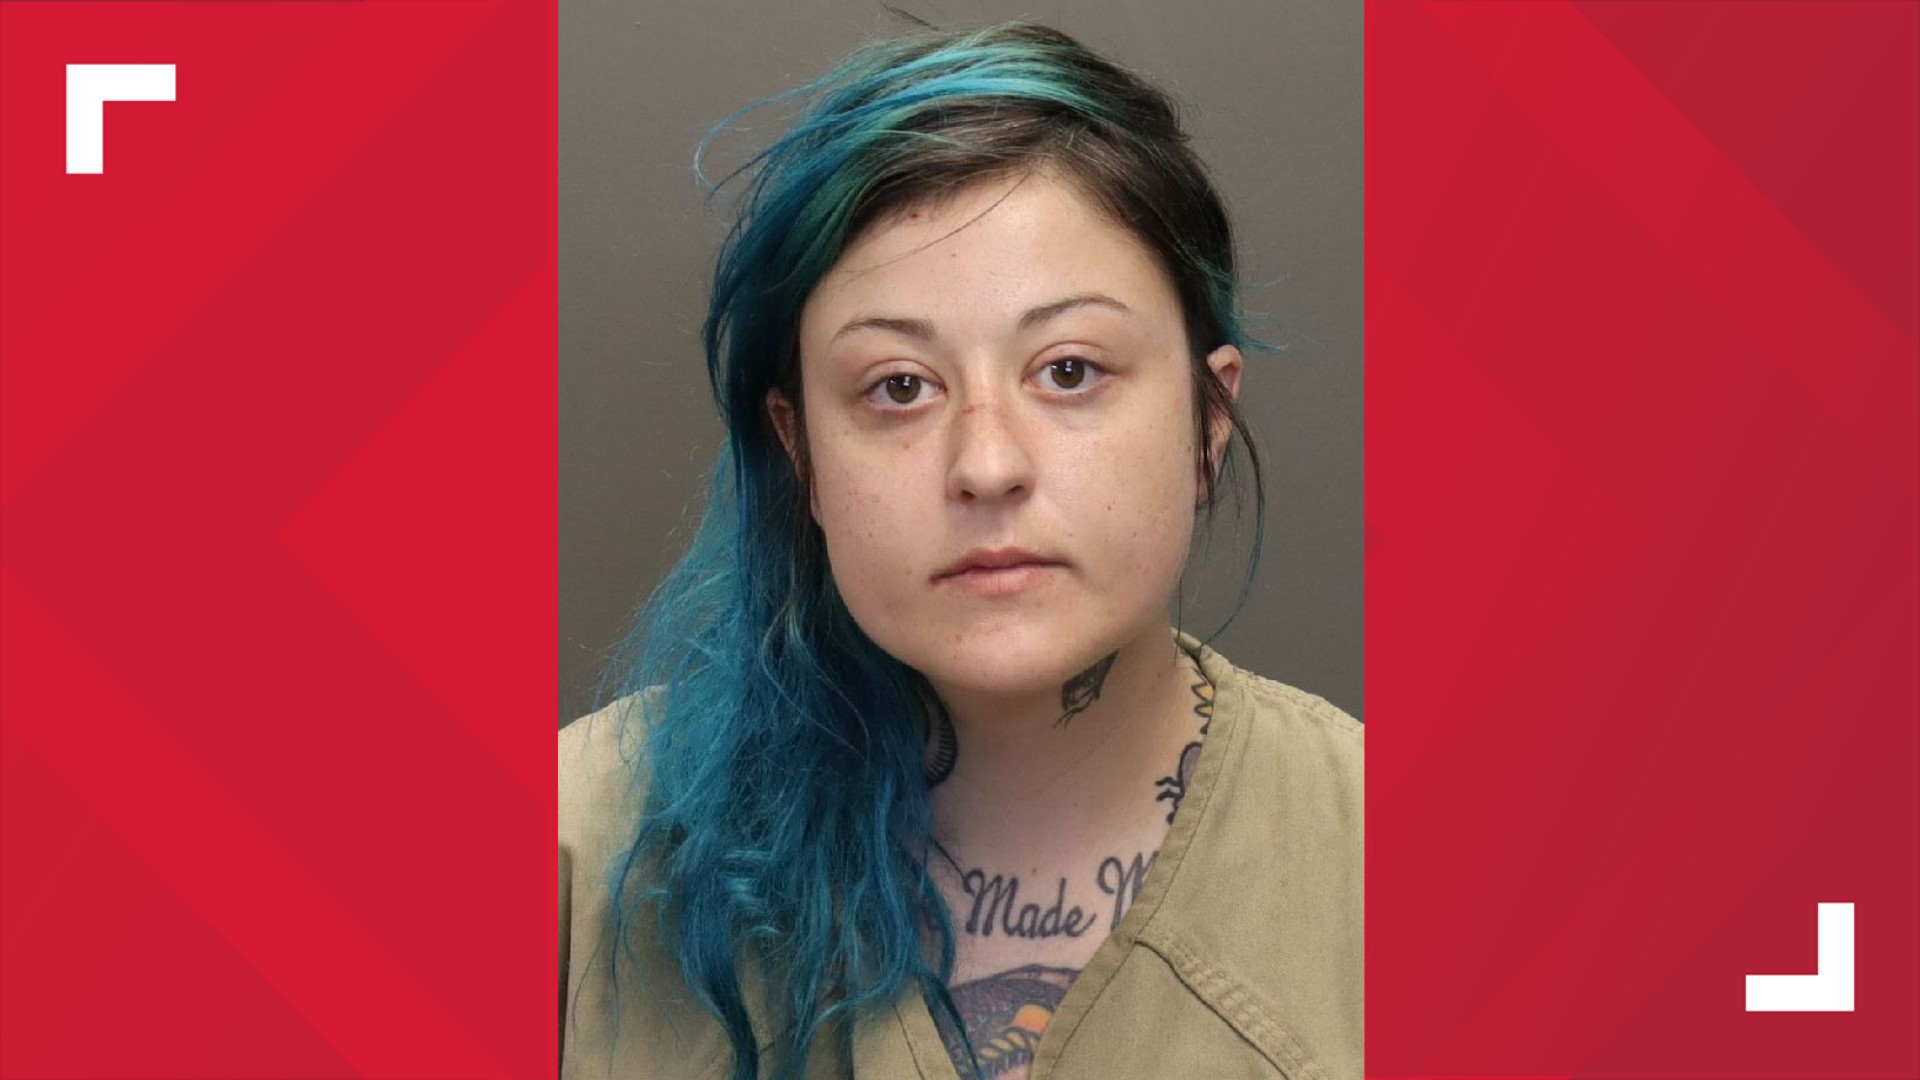 Alea Weil is facing six counts in connection with the crash that injured Ohio State Highway Patrol Trooper Adrian Wilson.